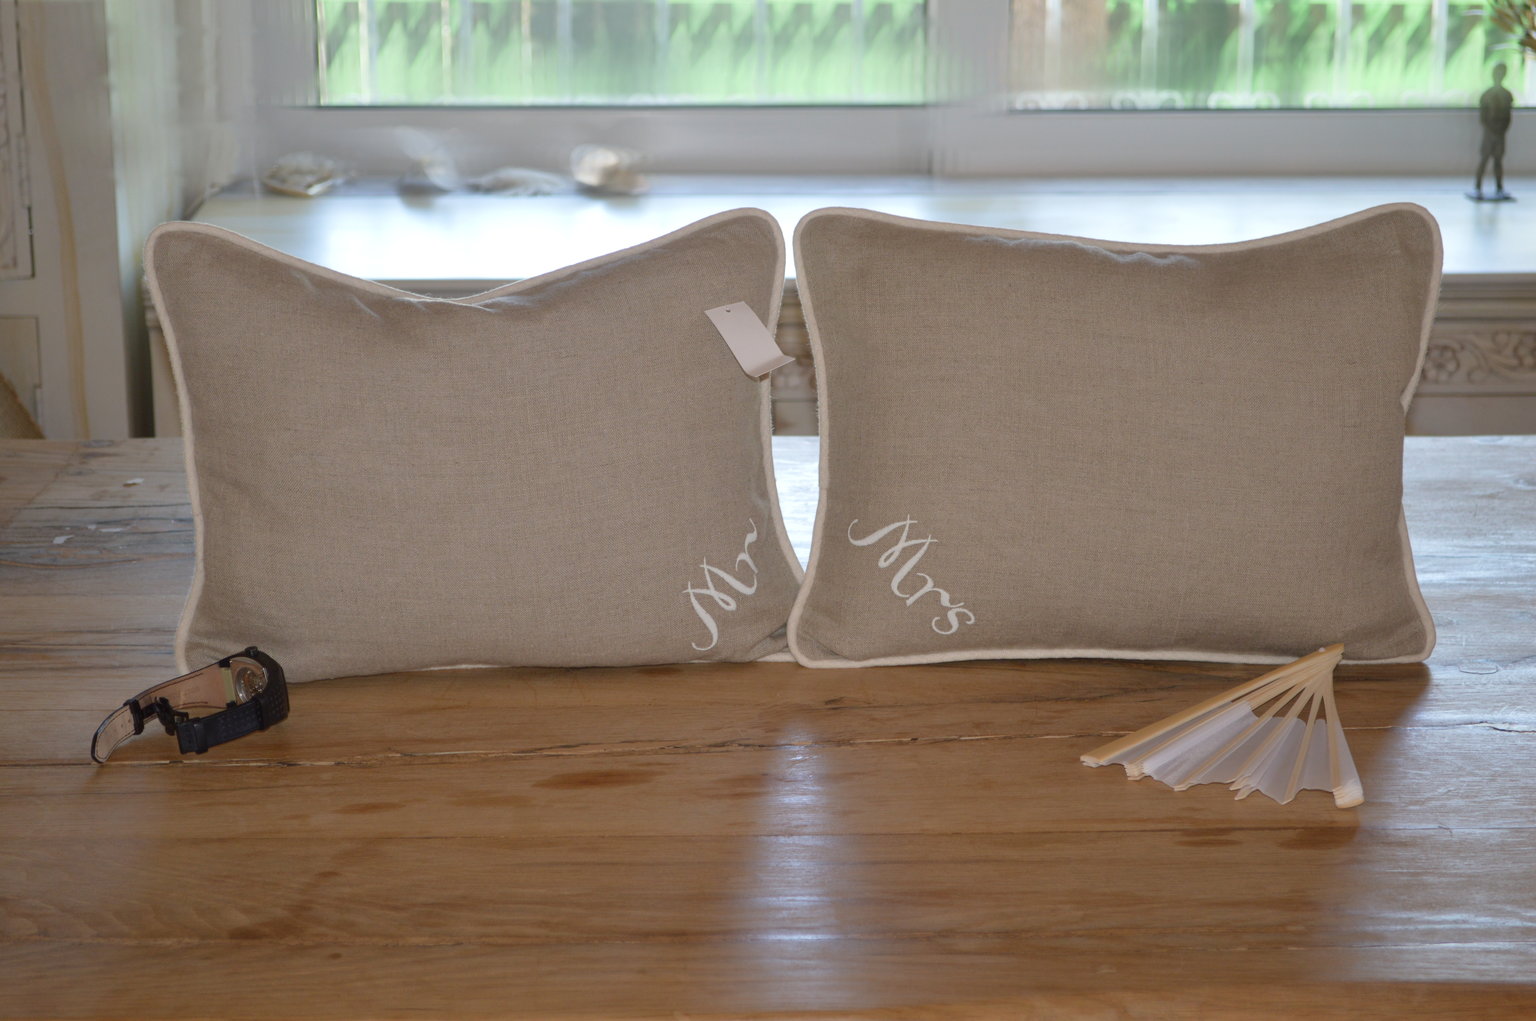 "Mr" and "Mrs" decorative pillows